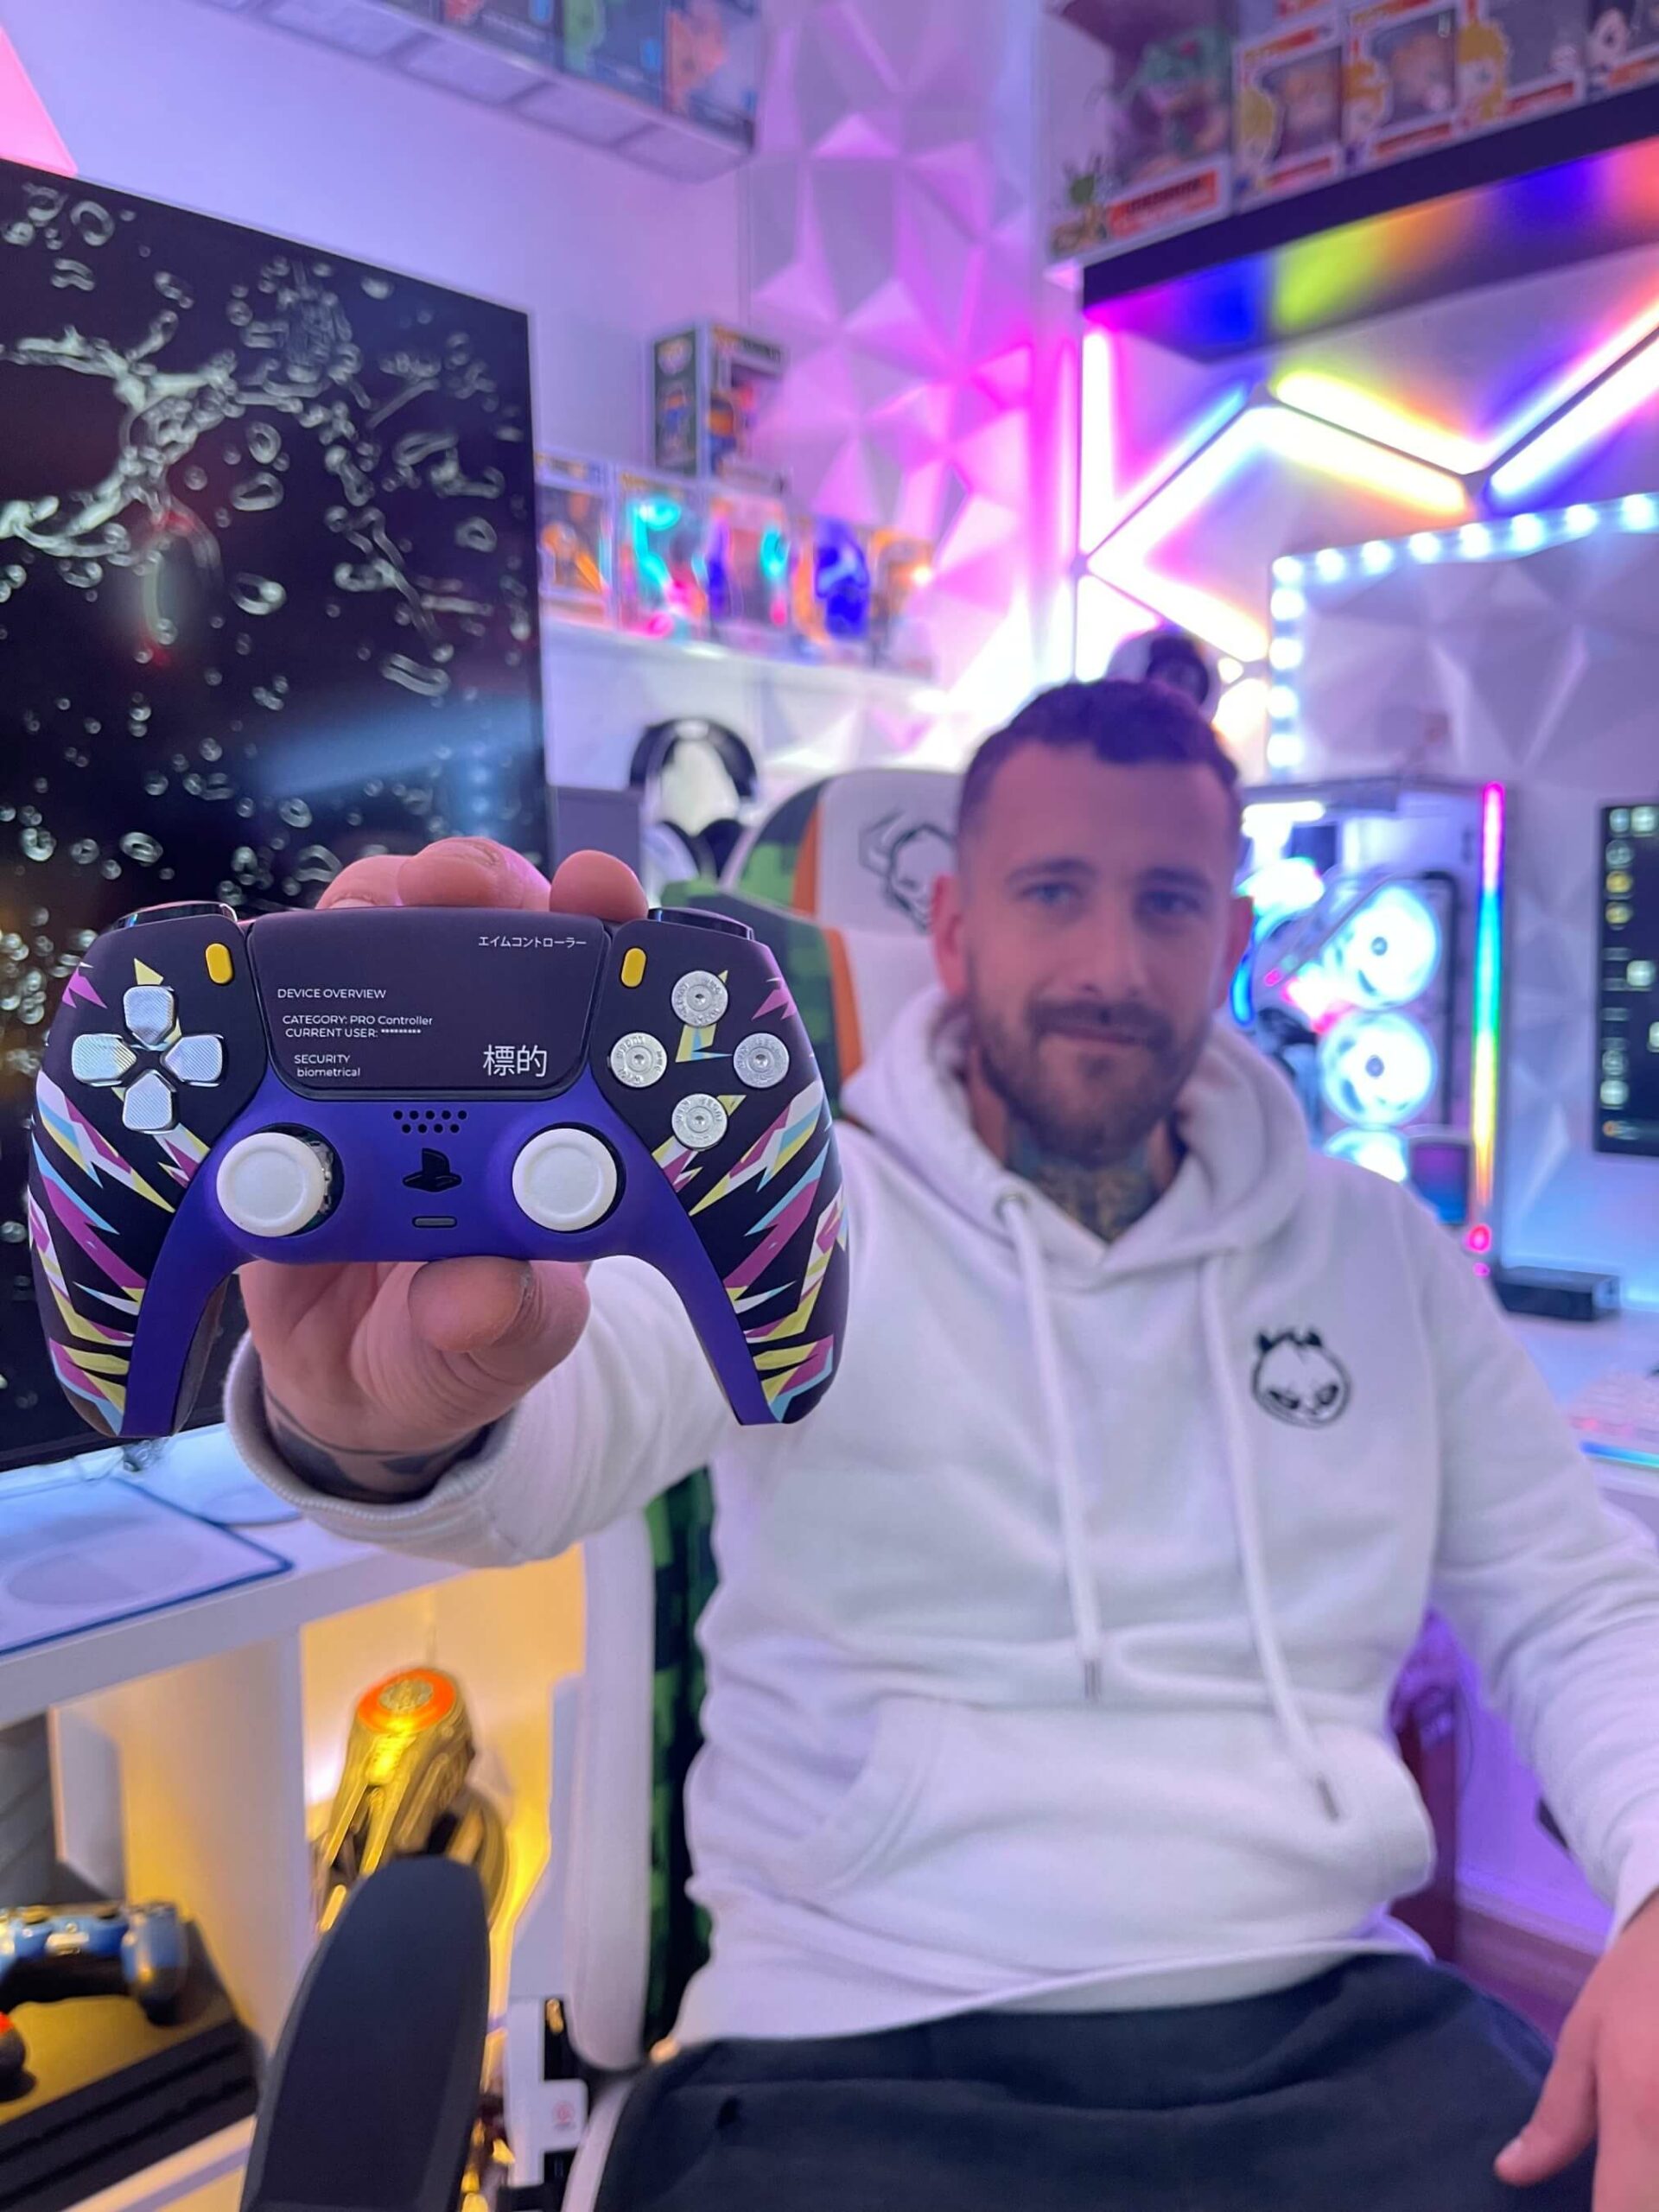 I Got the BEST CUSTOM Gaming Controller in 2023! (Aim Controller PS5) 